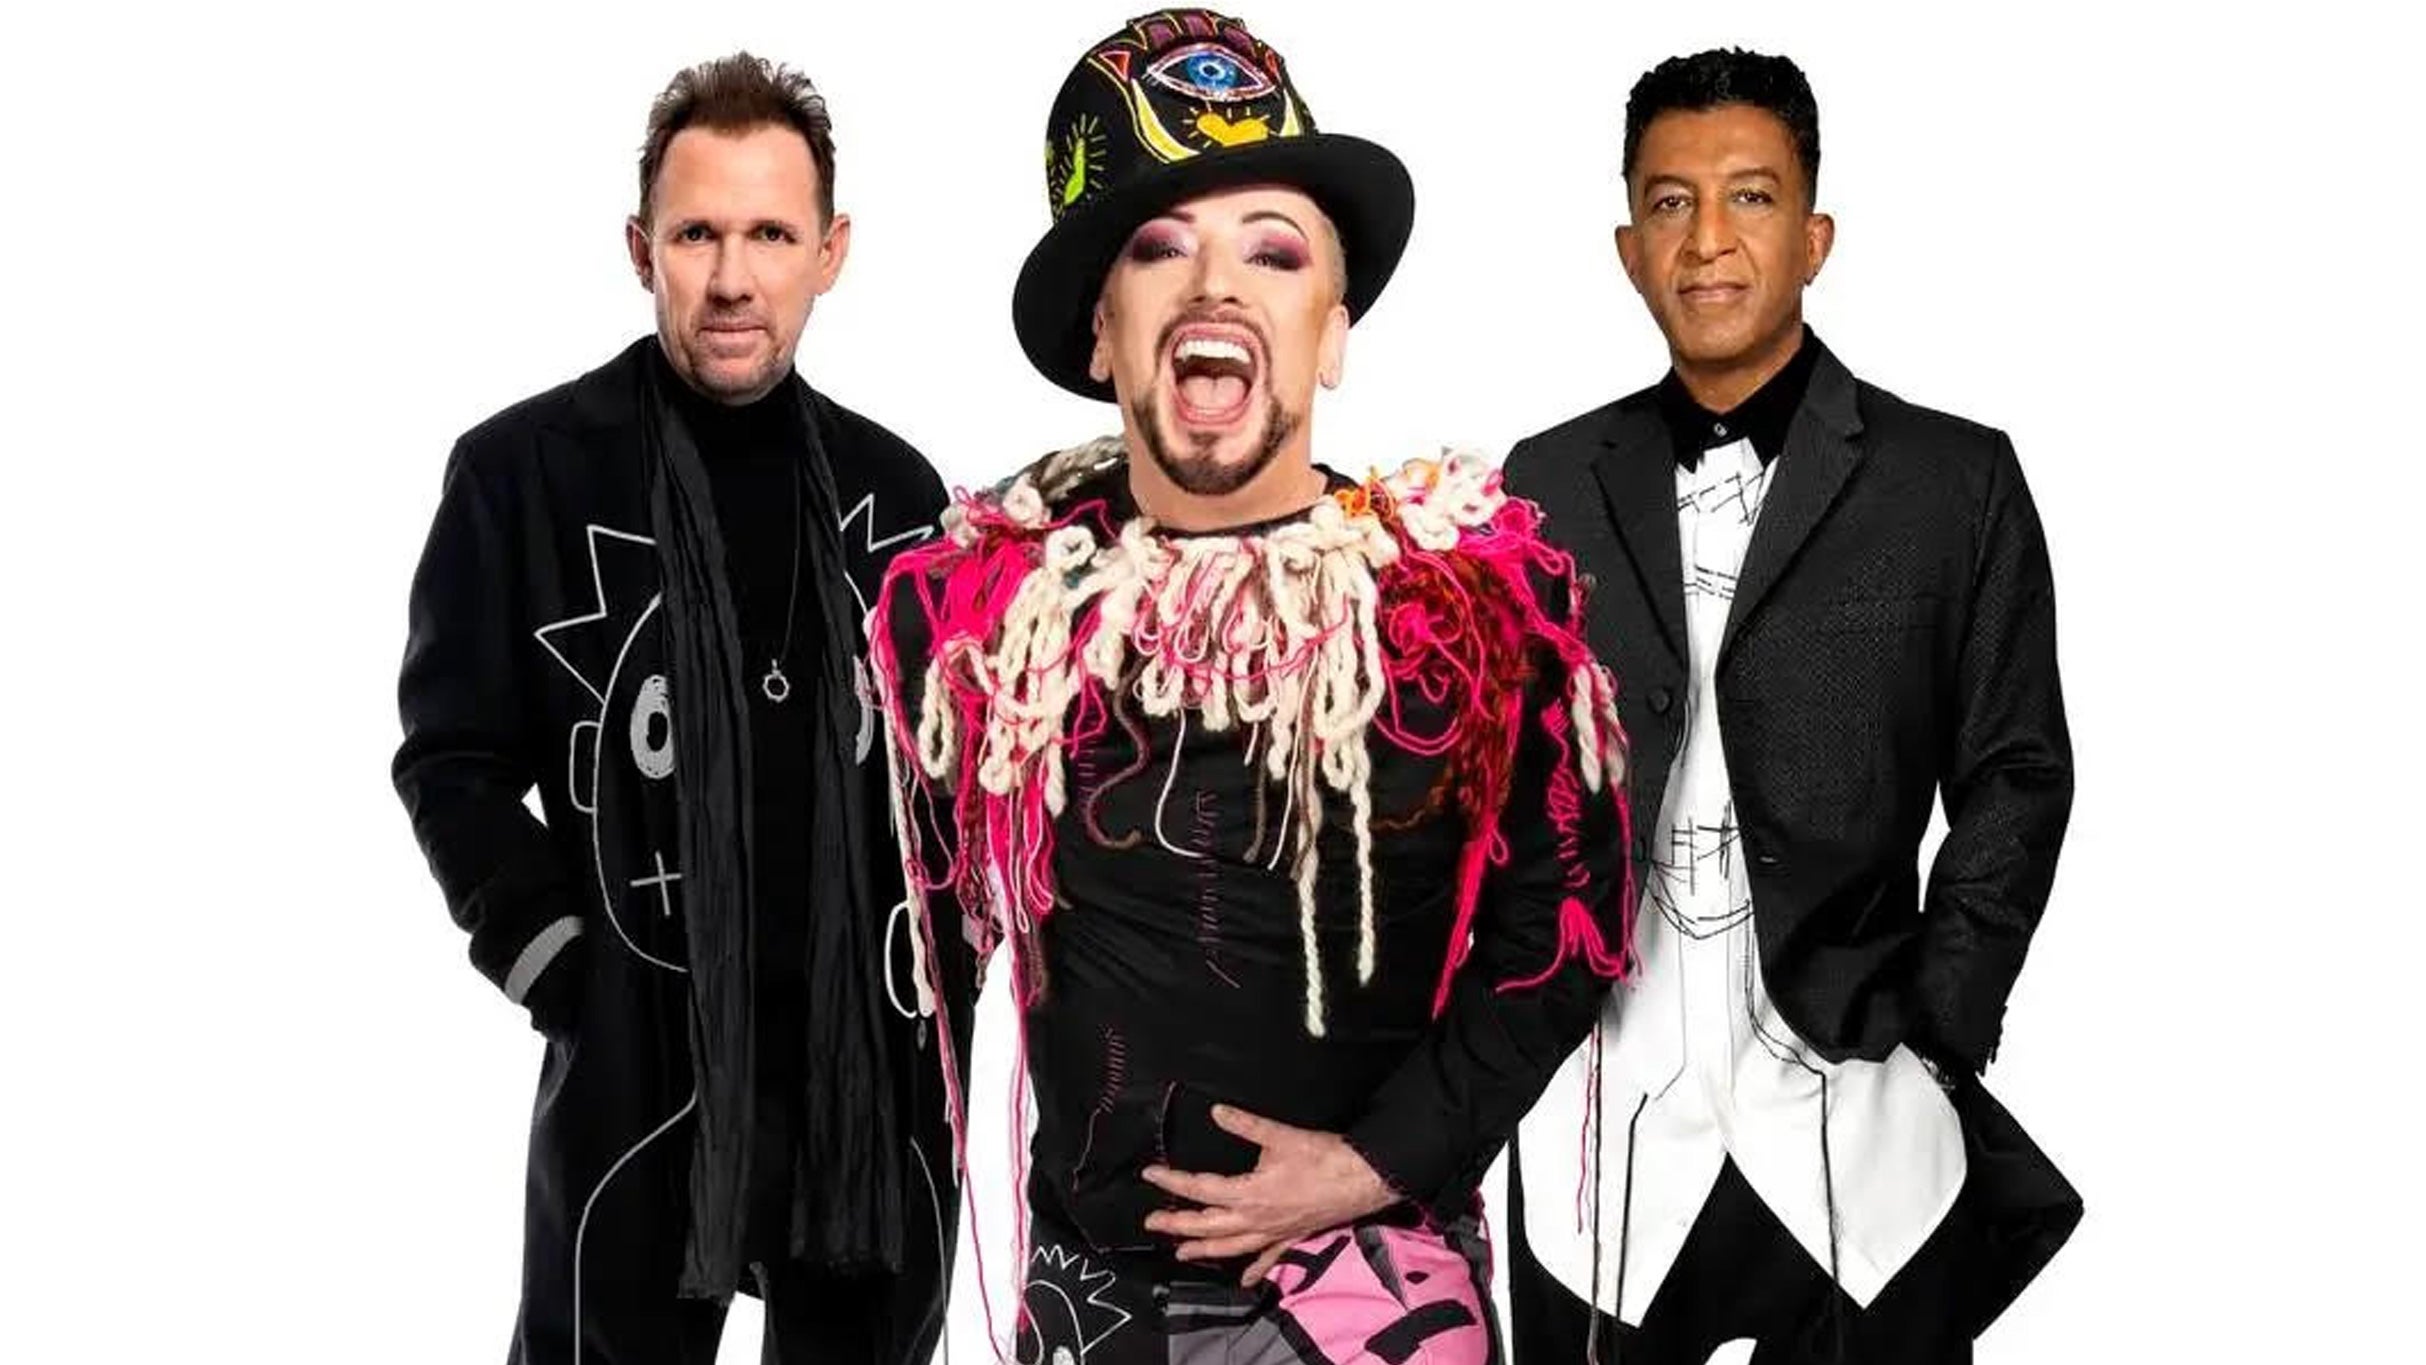 Boy George & Culture Club: The Letting It Go Show in Woodlands promo photo for Official Platinum presale offer code